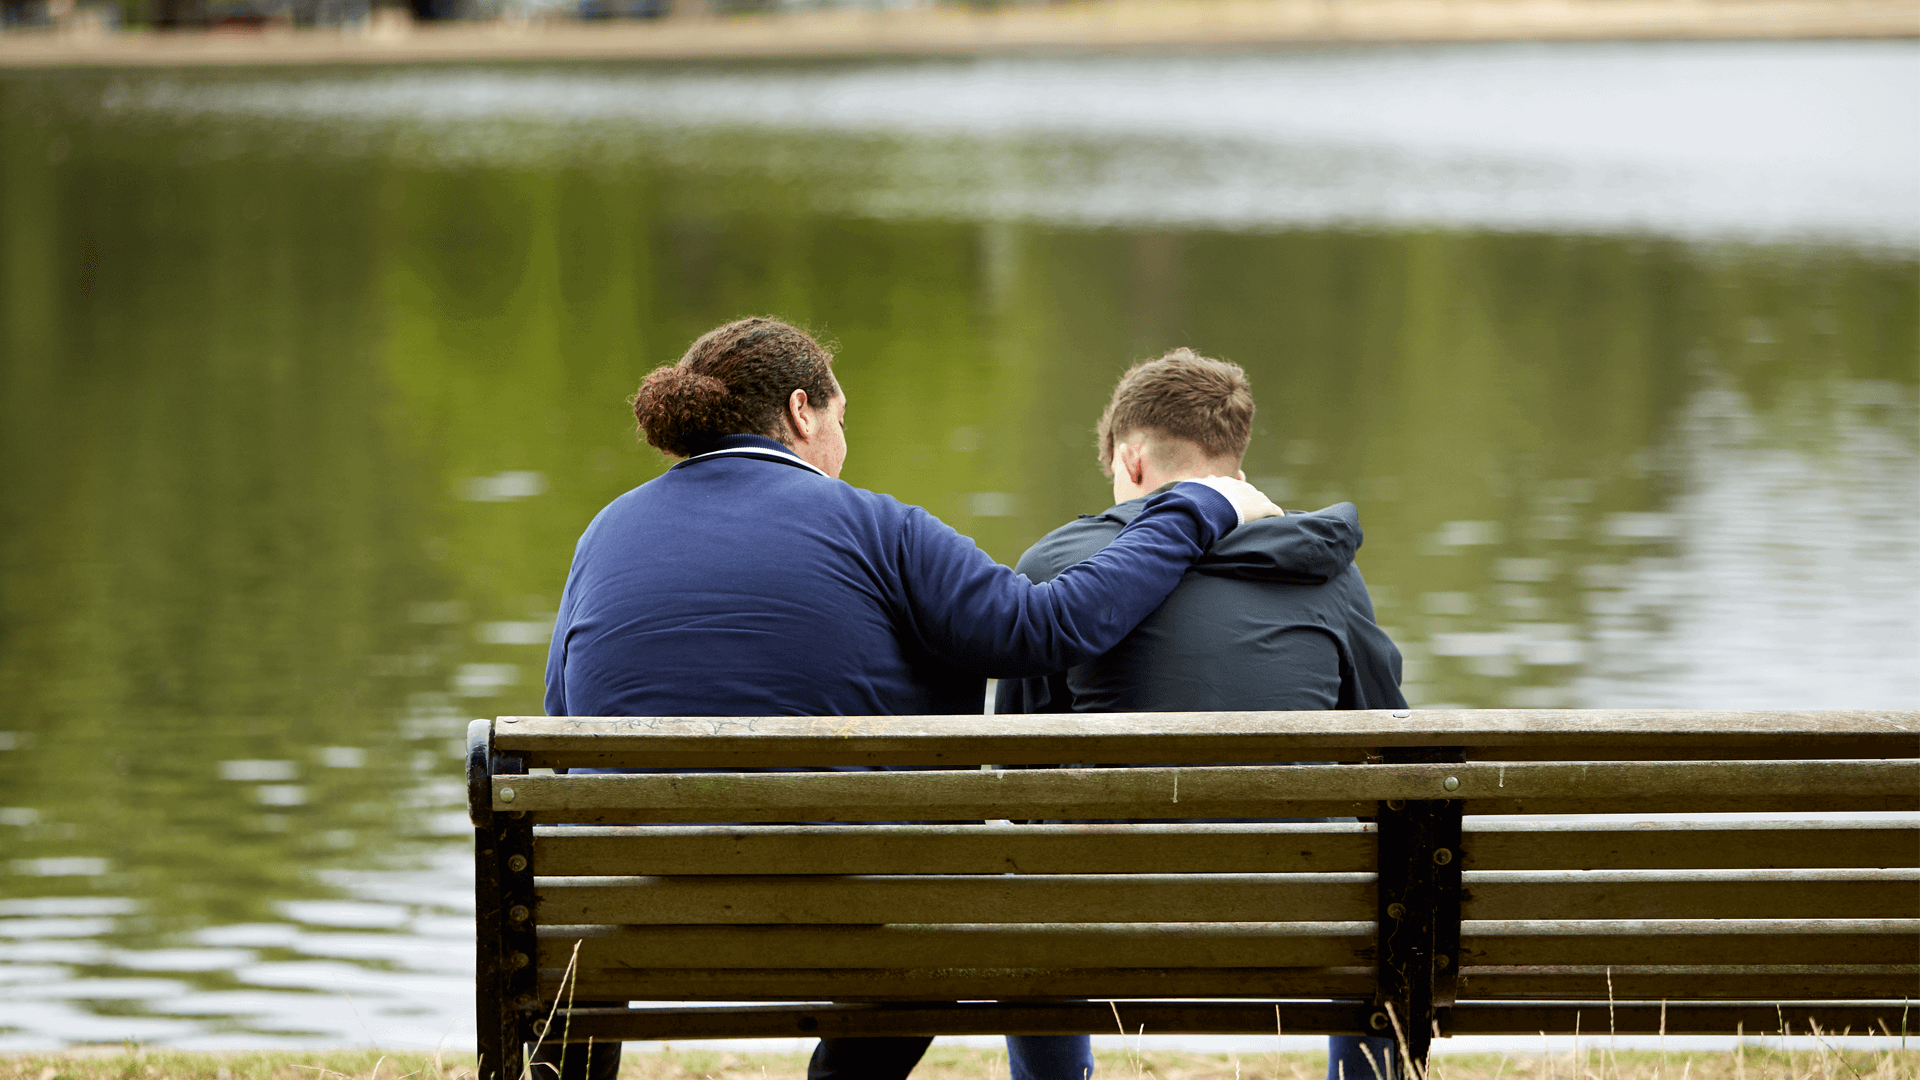 medium shot of two boys sitting on a bench in front of the lake comforting each other one boy puts his hand on the shoulder of his friend